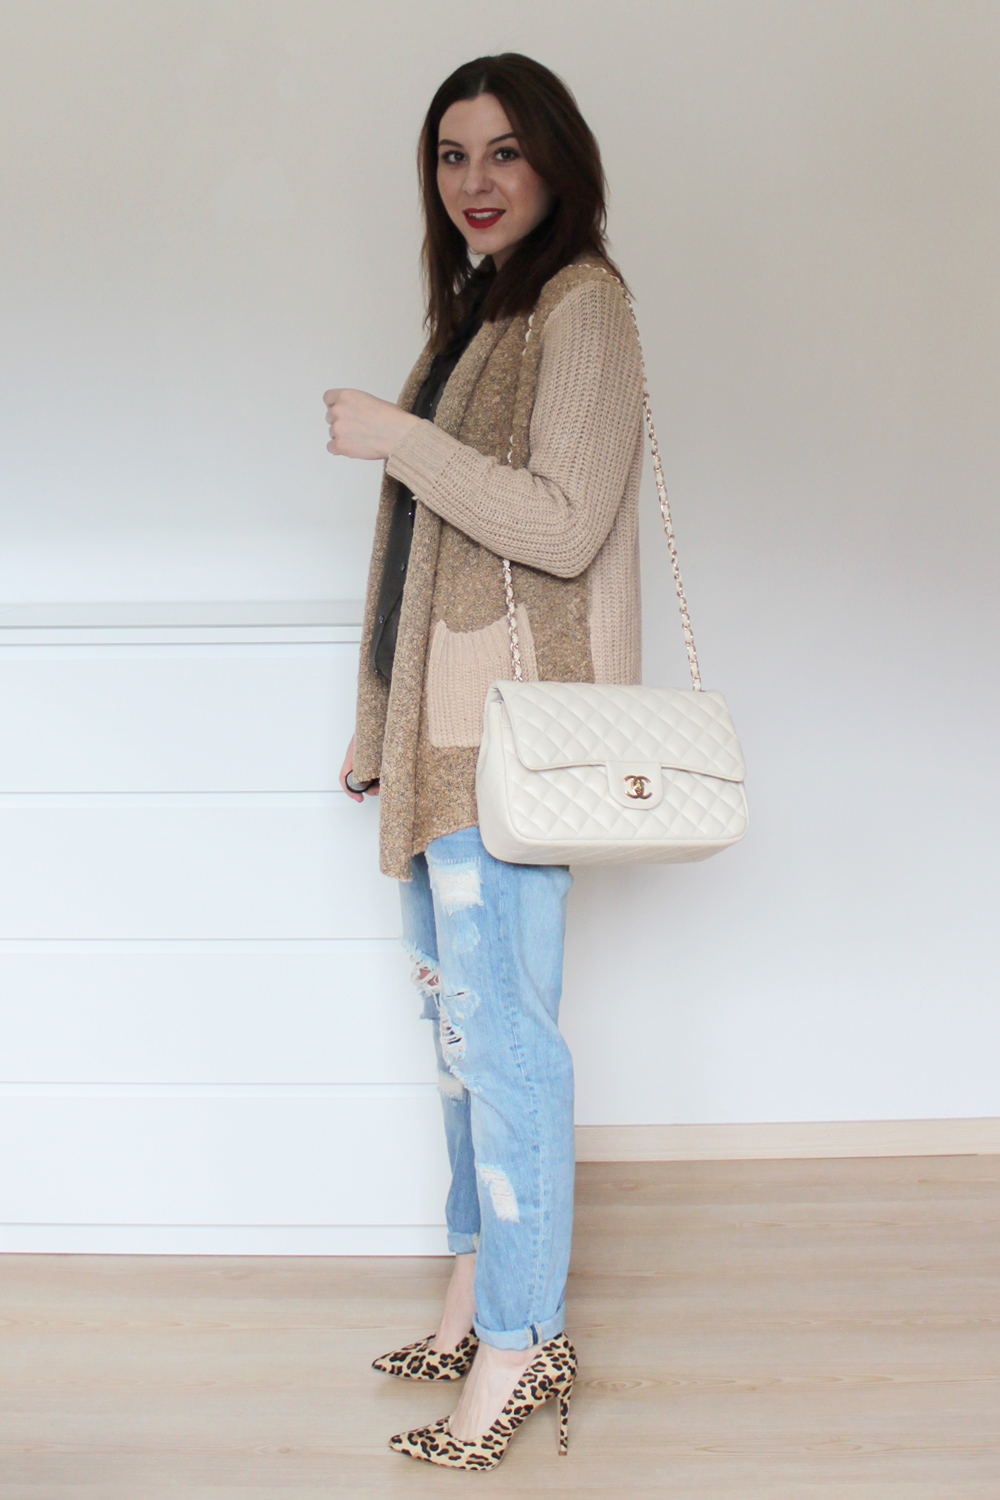 who is mocca, blogger, tirol, outfit, ootd, fashionblogger, weekly wardrobe review, alltagsoutfit, everyday look, inspiration, wie kombiniere ich, how to style, chanel 255 jumbo bag beige, newlook leopard pumps, cardigan oasap, boyfriend jeans zara, whoismocca.com